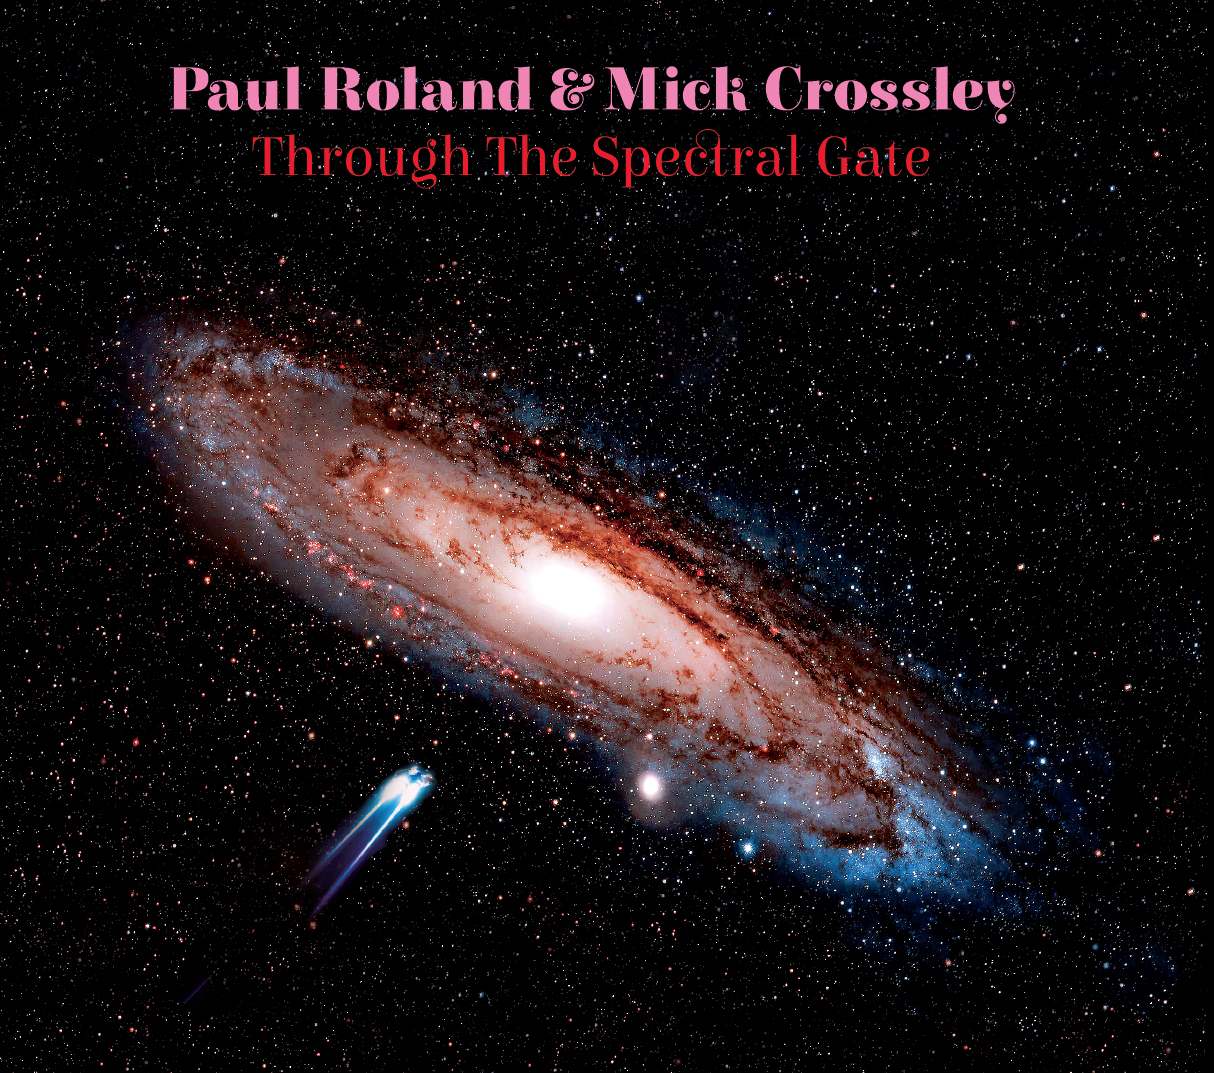 ROLAND PAUL - CROSSLEY MICK - Through The Spectral Gate (double album on a single CD lim. Ed.)